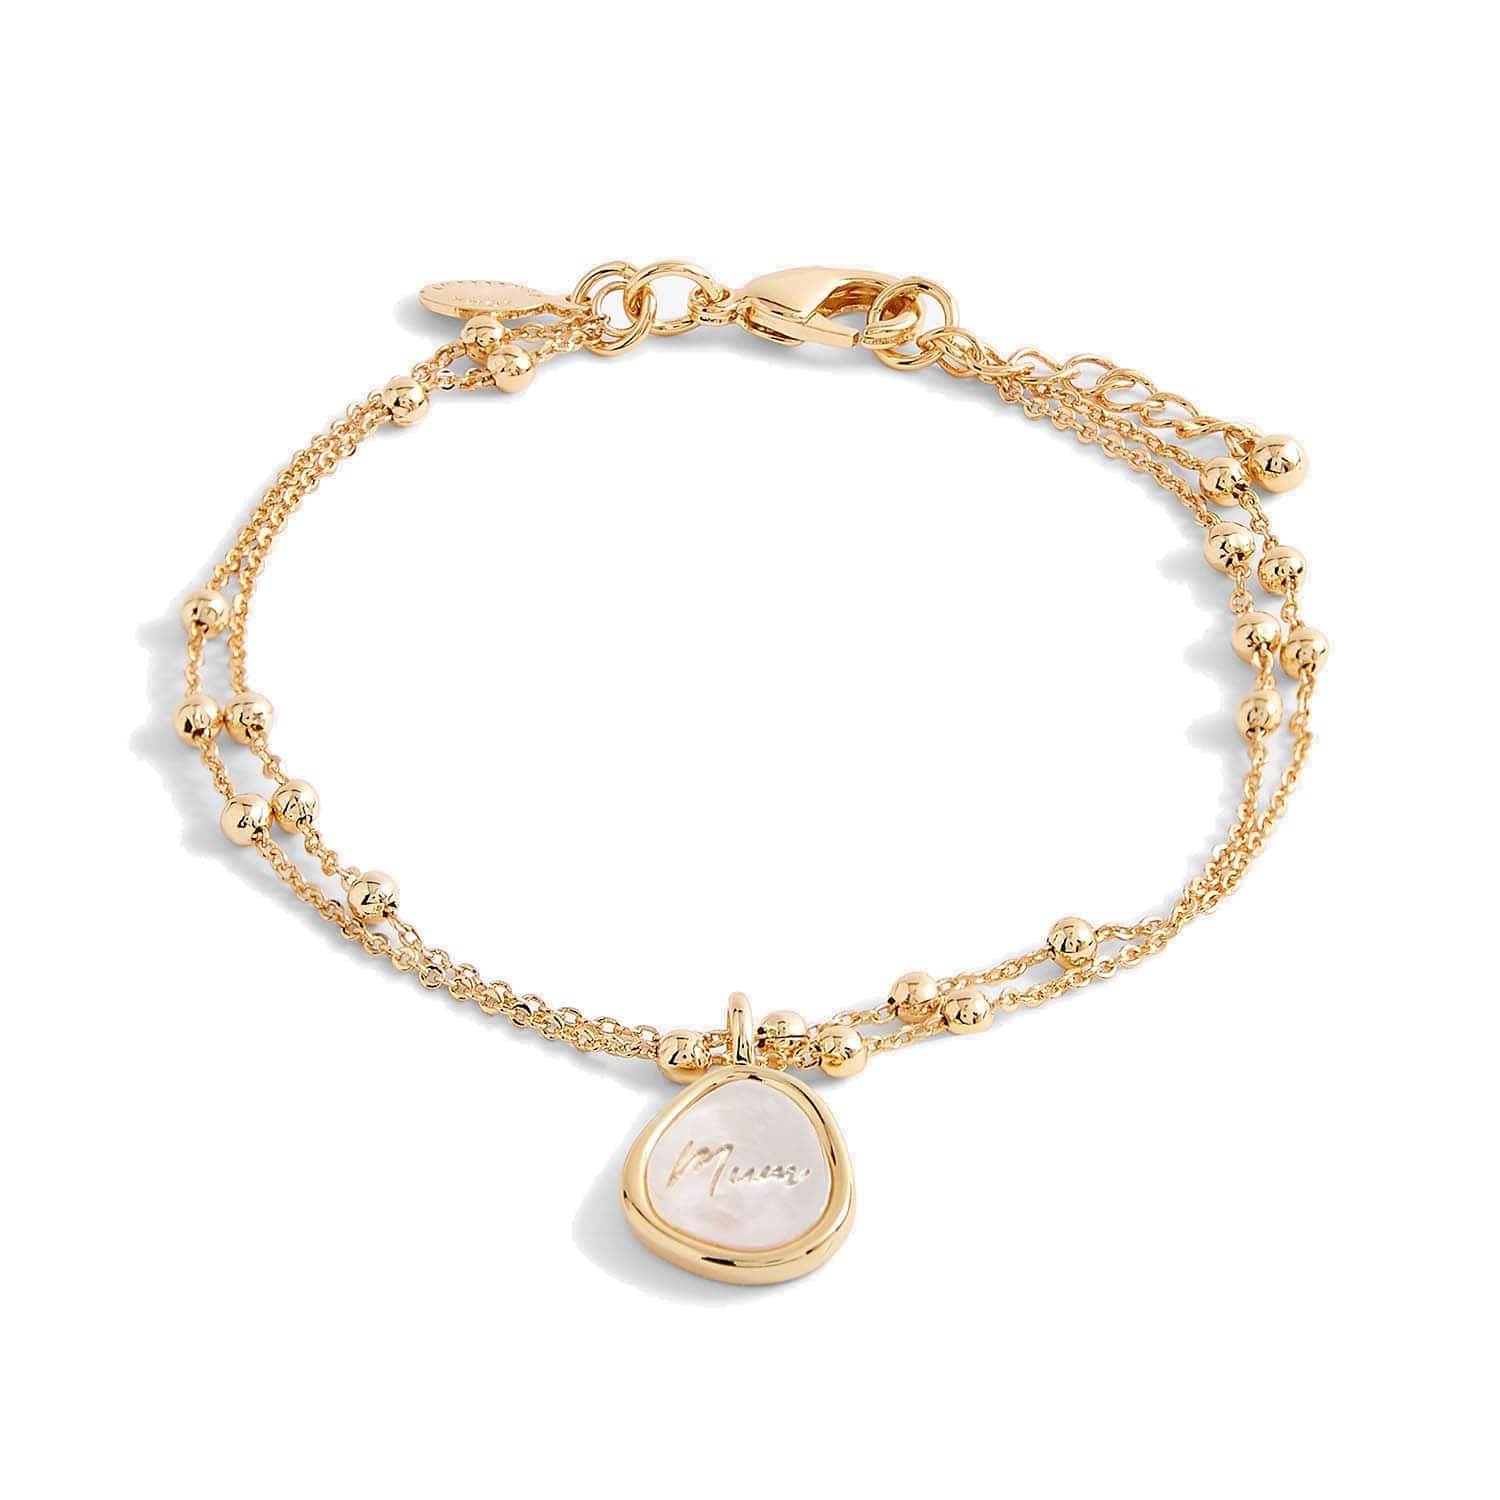 Joma Jewellery Bracelet Joma Jewellery Bracelet - Thank You For Being My Amazing Mum